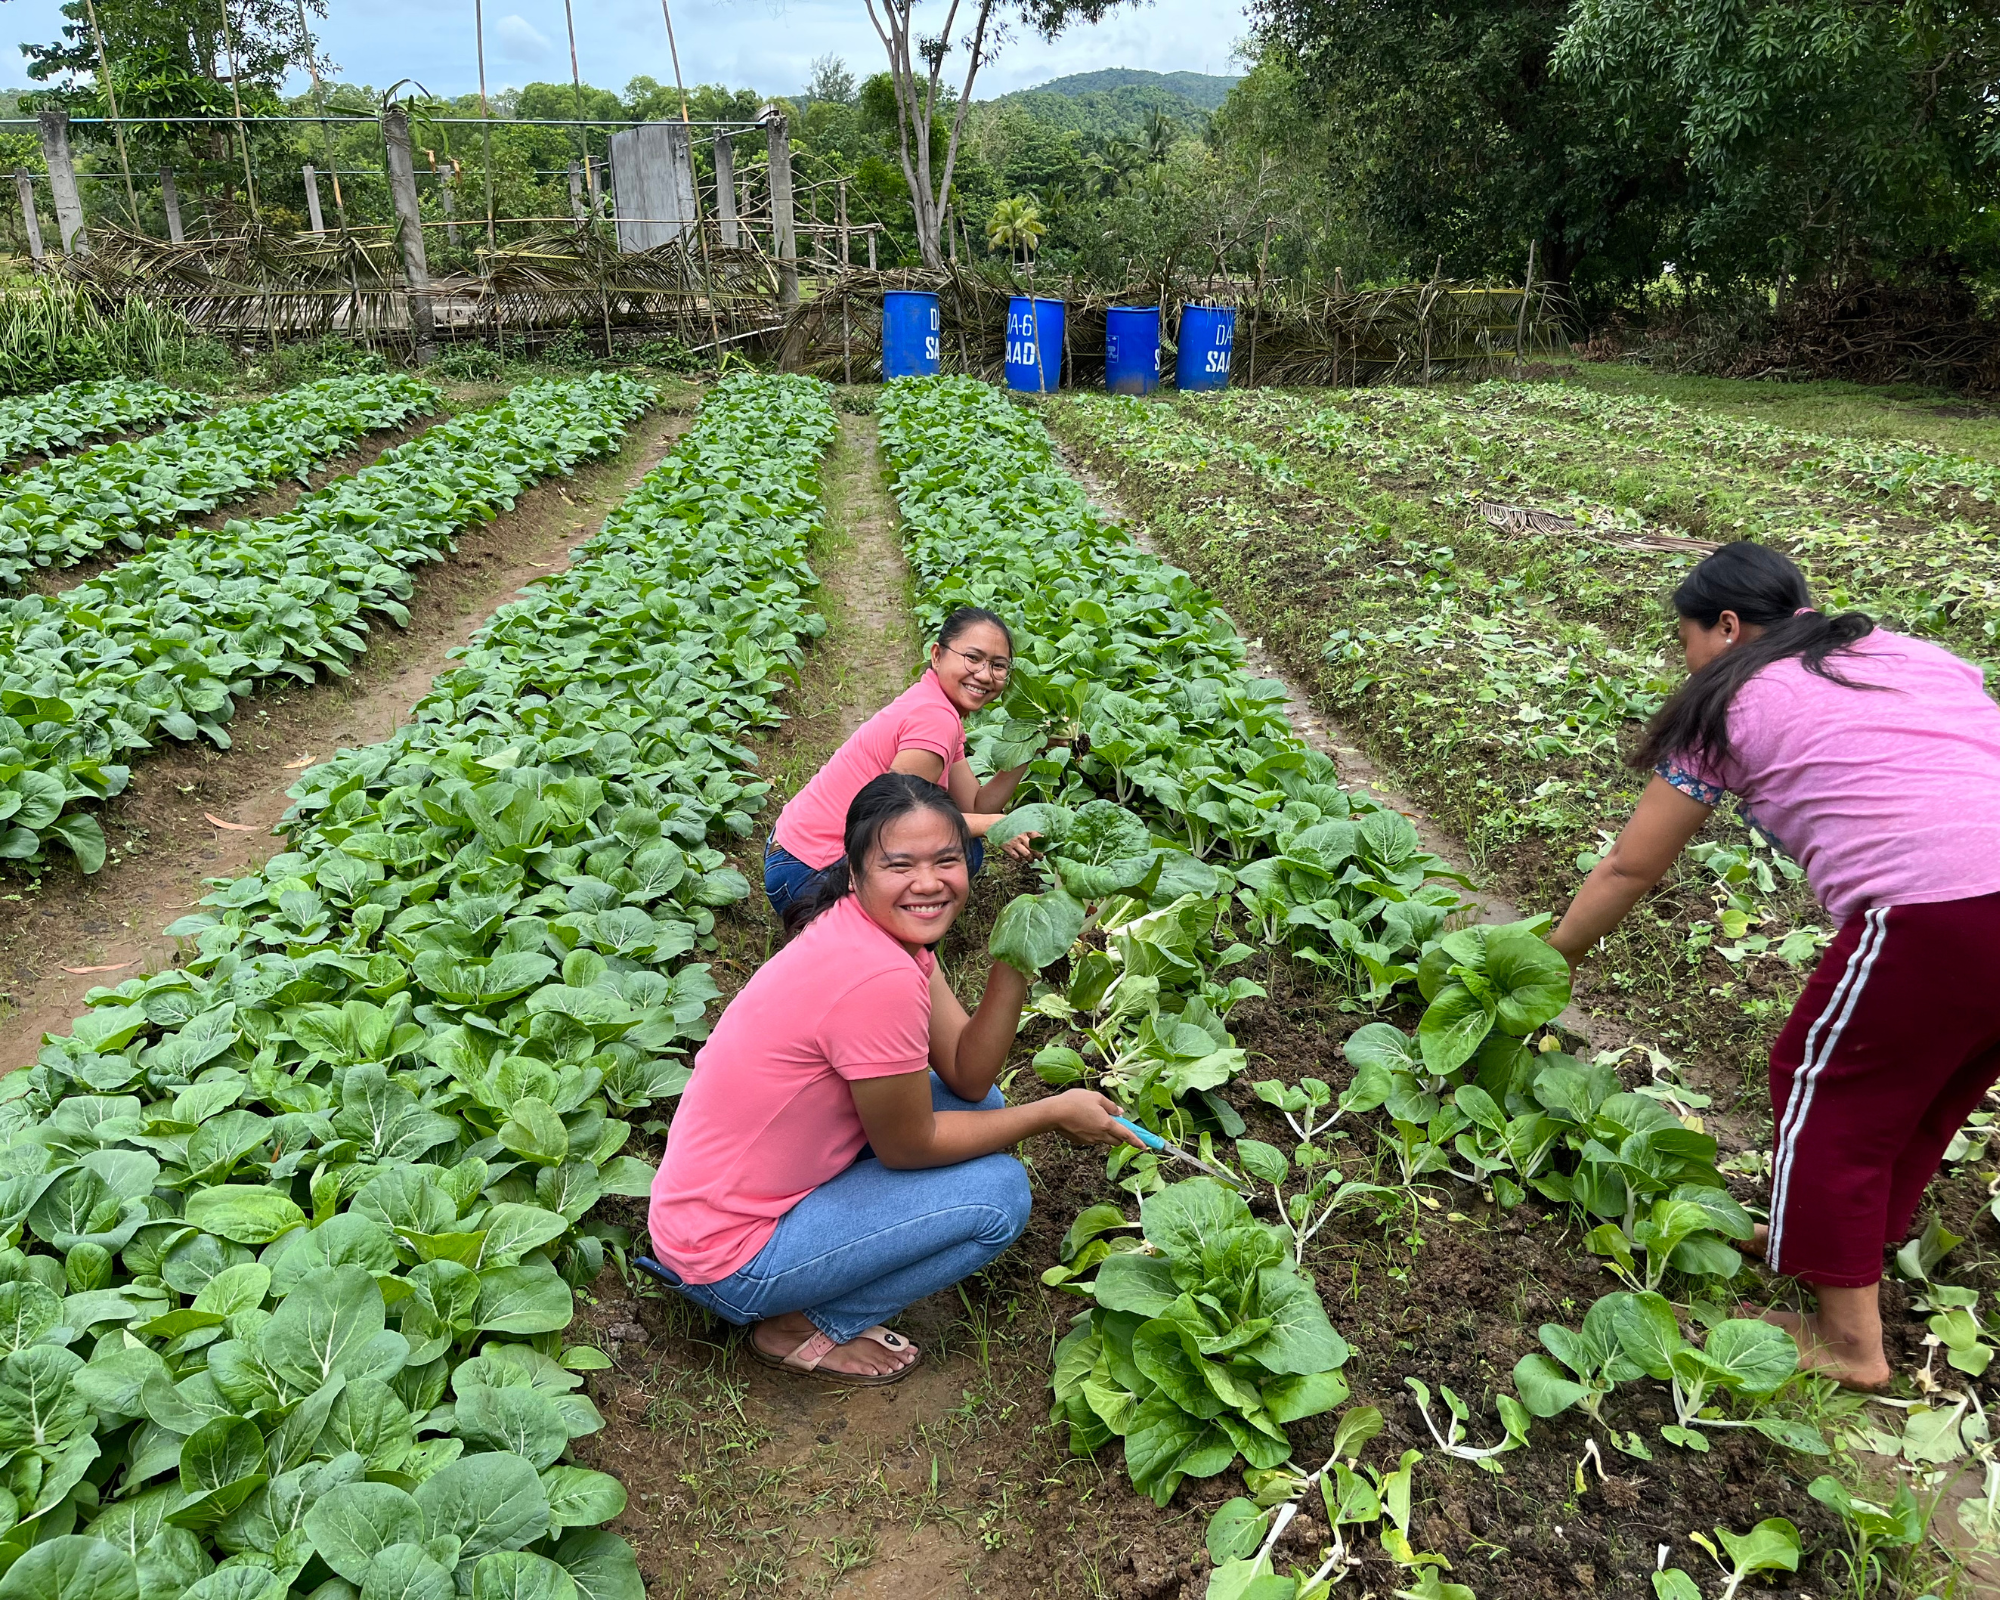 Aklan farmers earn Php25K within a month from veggie venture